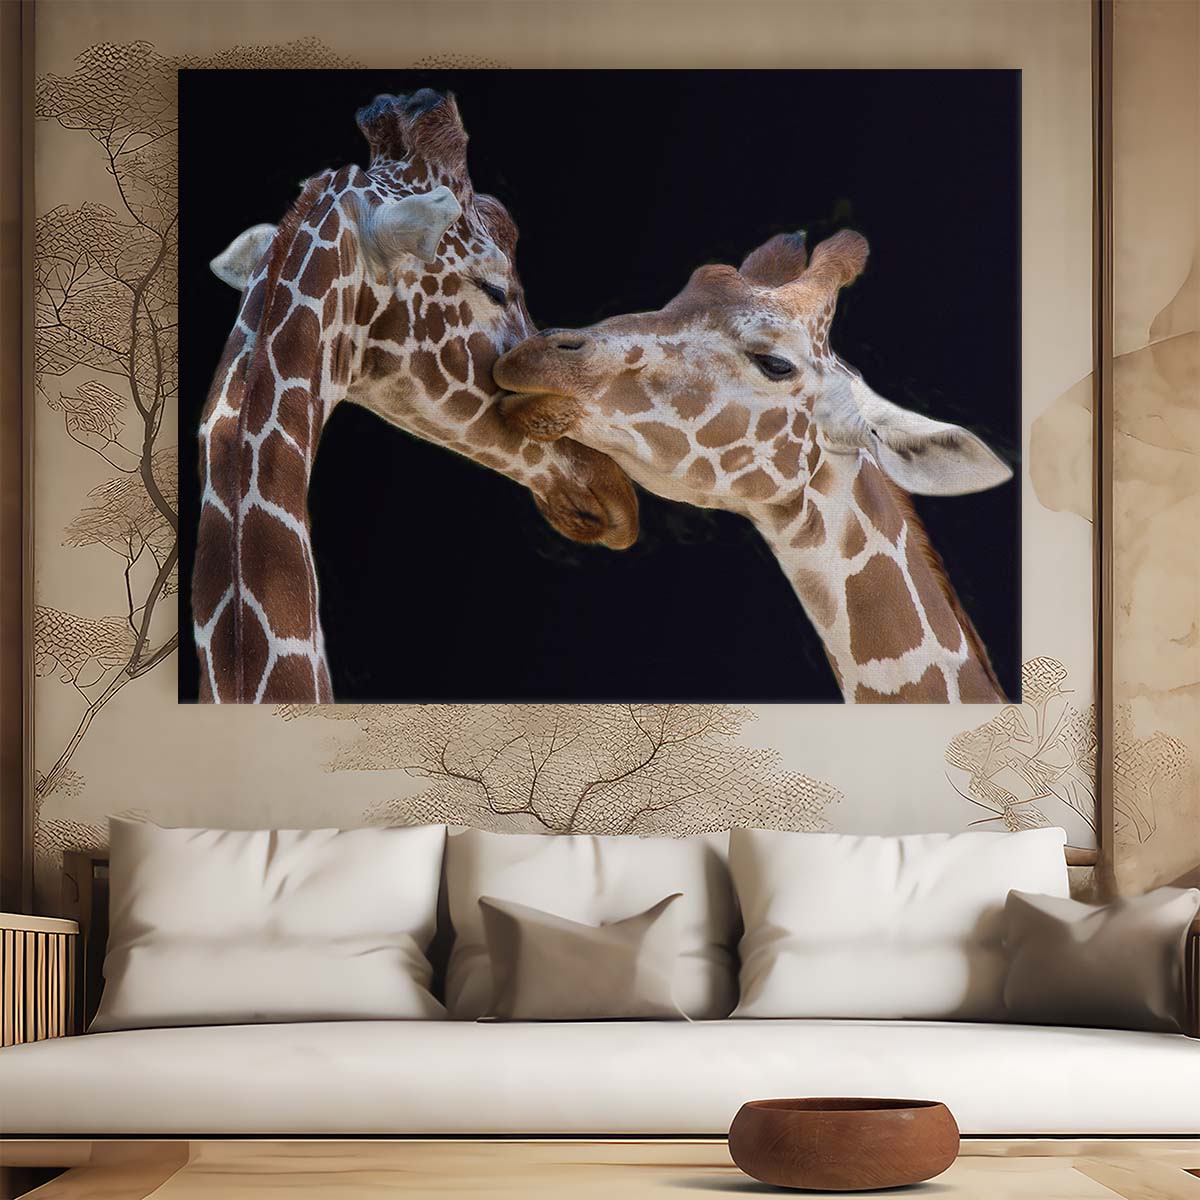 Romantic Giraffe Couple Embrace Zoo Love Wall Art by Luxuriance Designs. Made in USA.